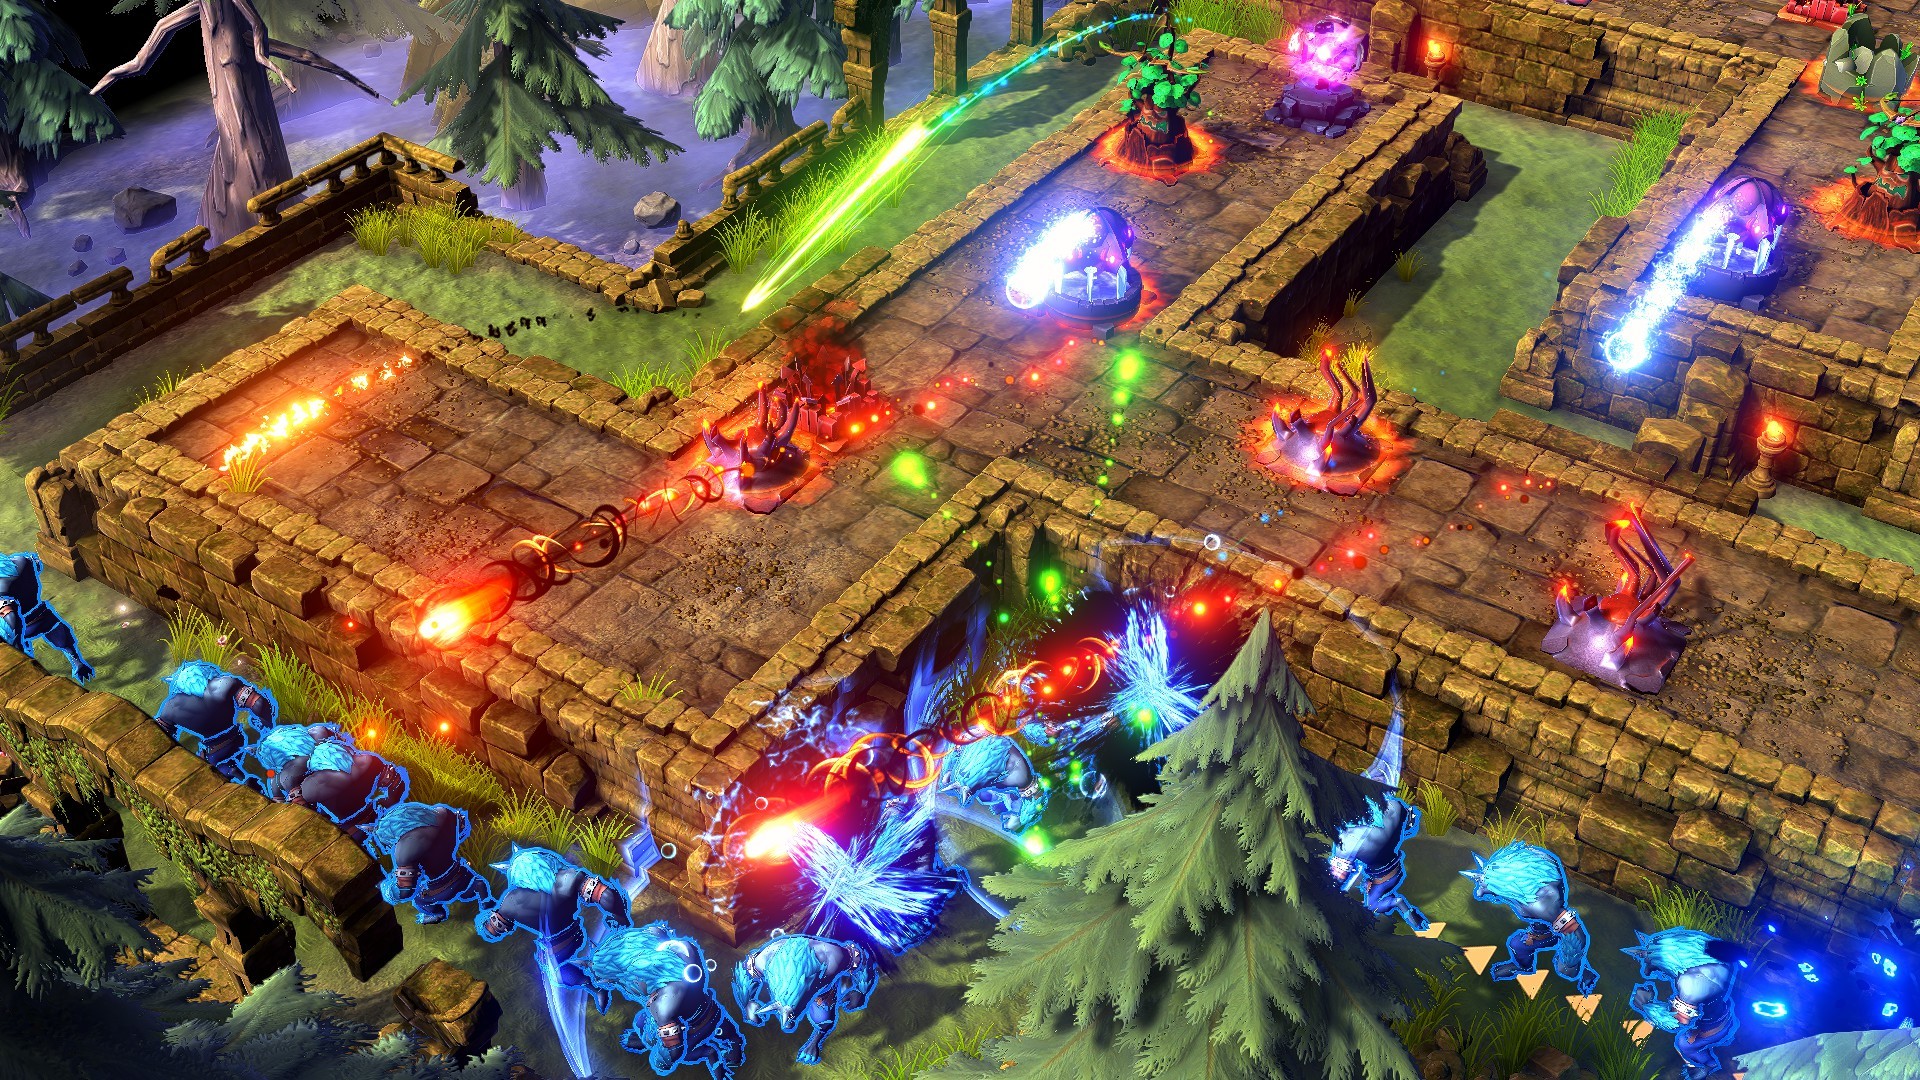 Element TD 2 is an artifact from the golden age of tower defense